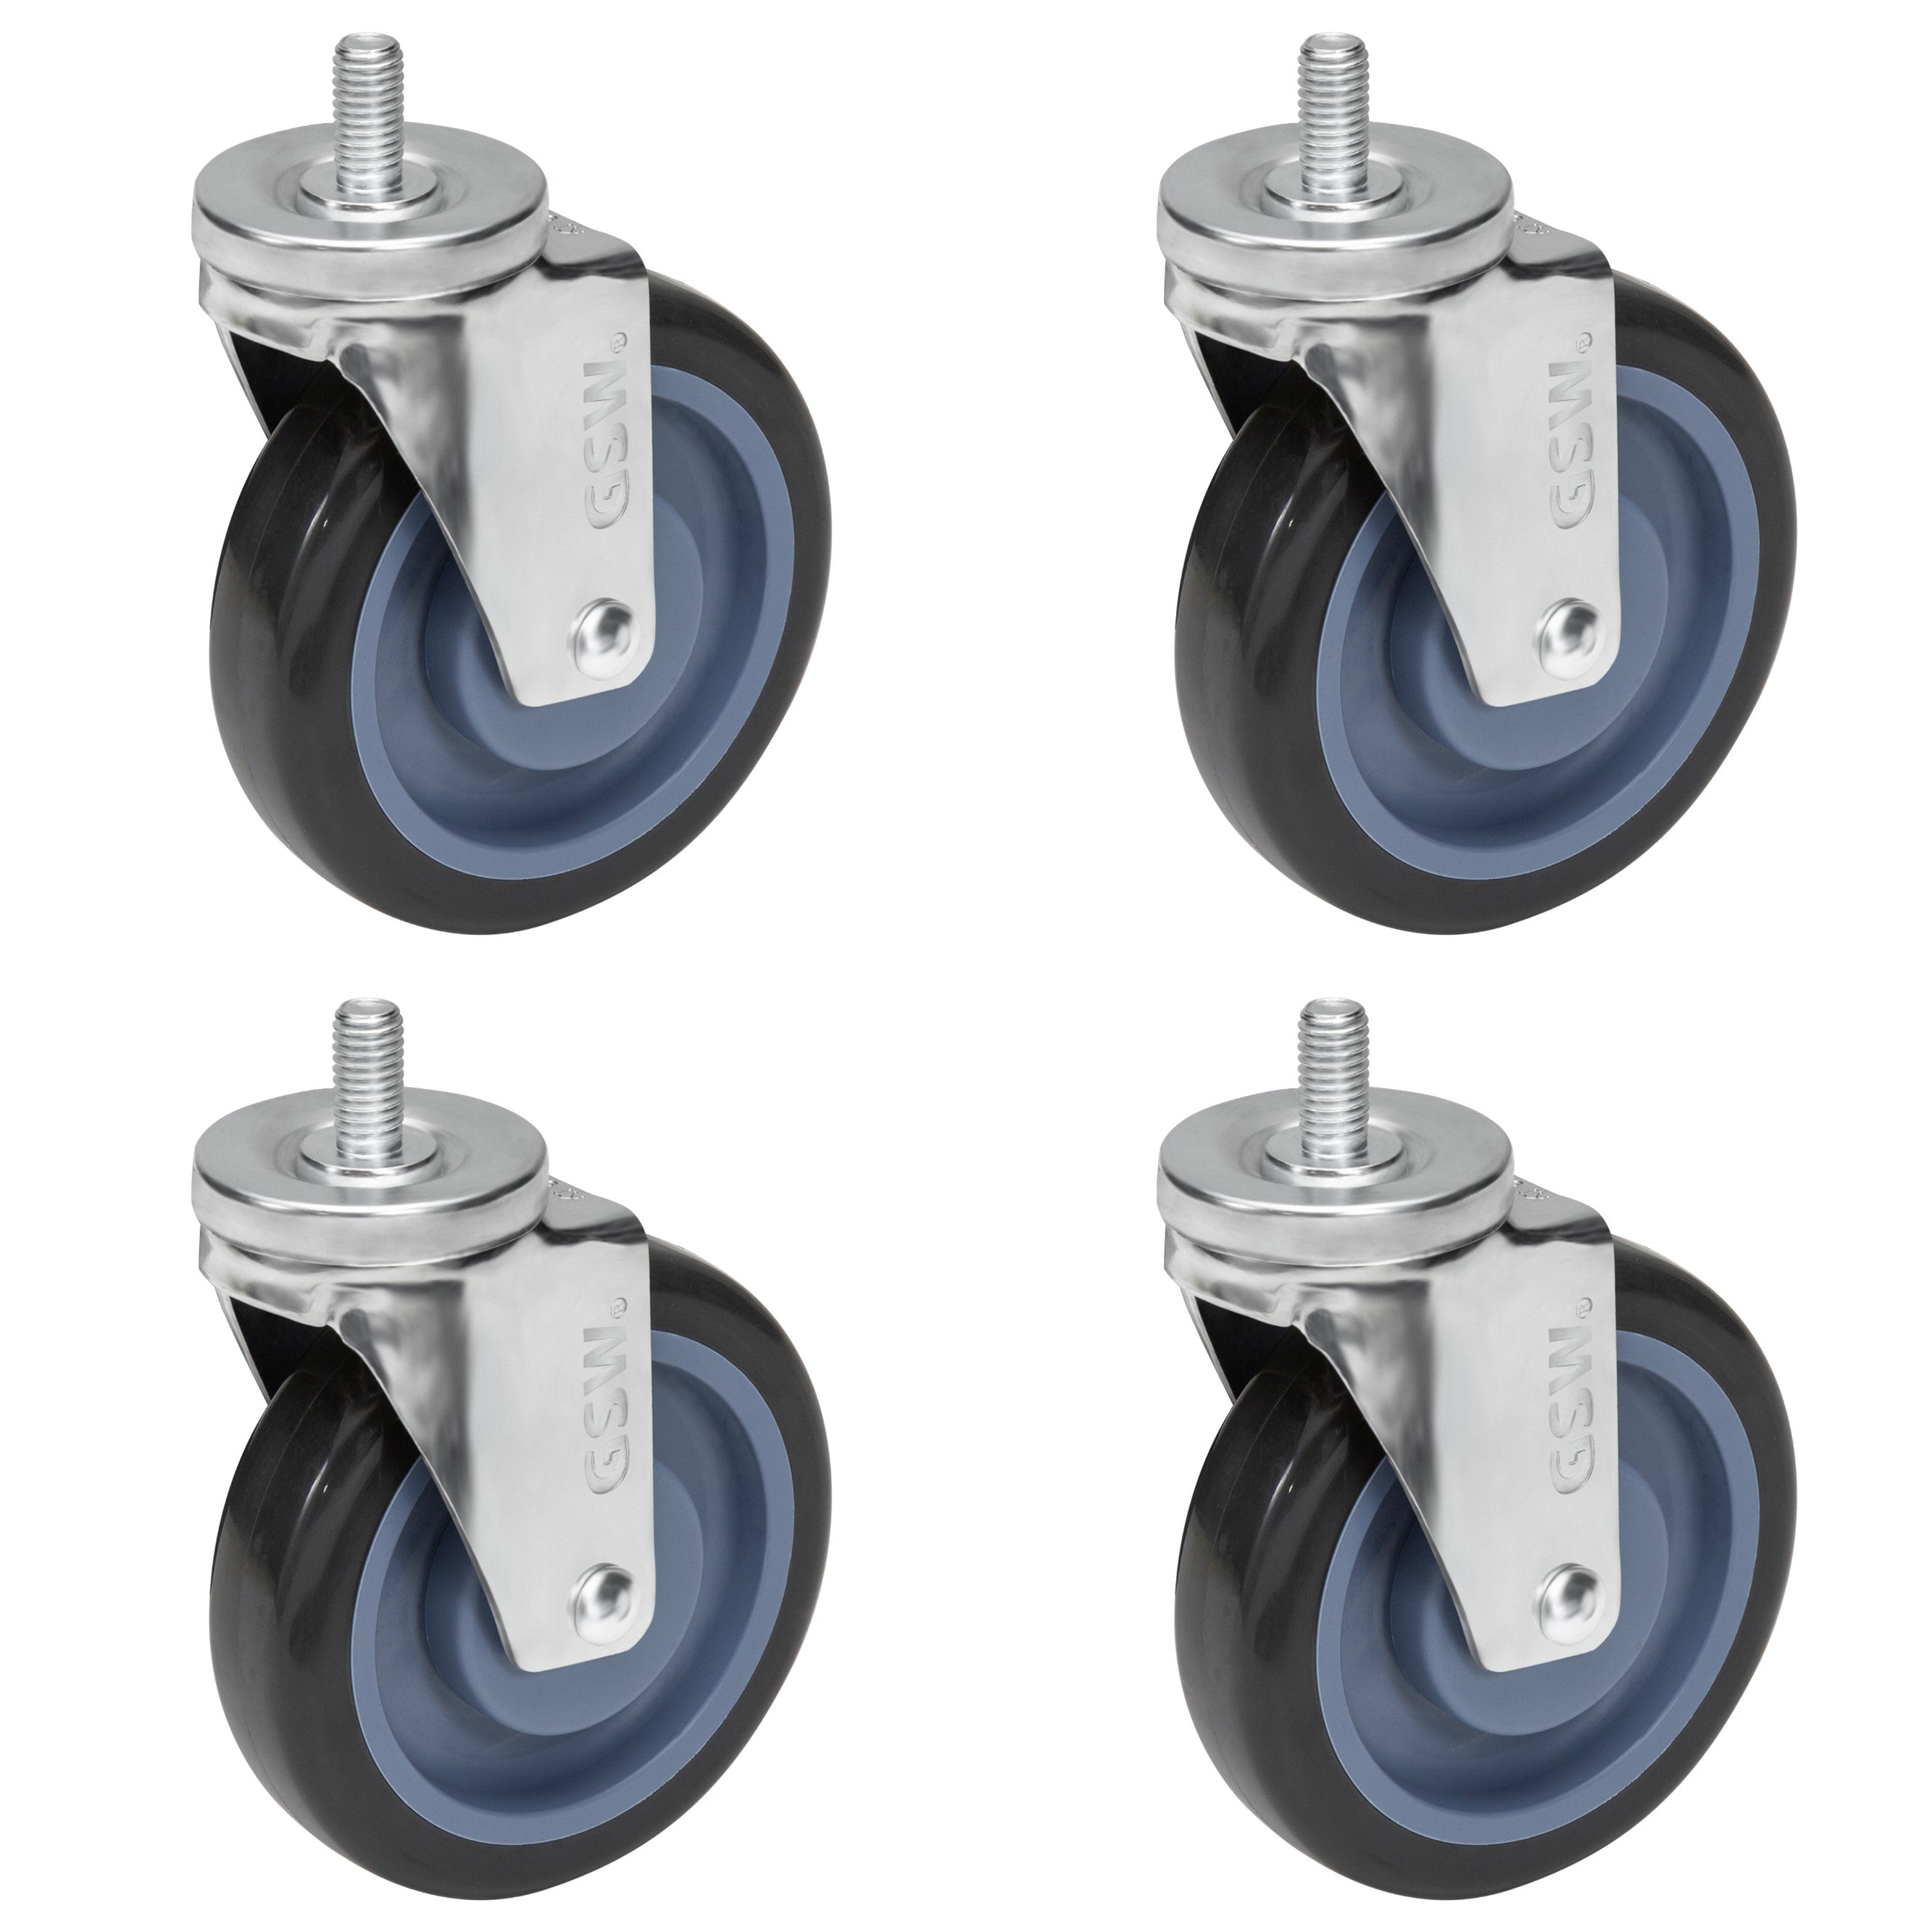 GSW 4" Caster Replacement Shopping Cart Wheels, Polyurethane Stem Casters Set of 4 for most refrigerators, Cart with Loading Capacity 1320 Lbs (Swivel)